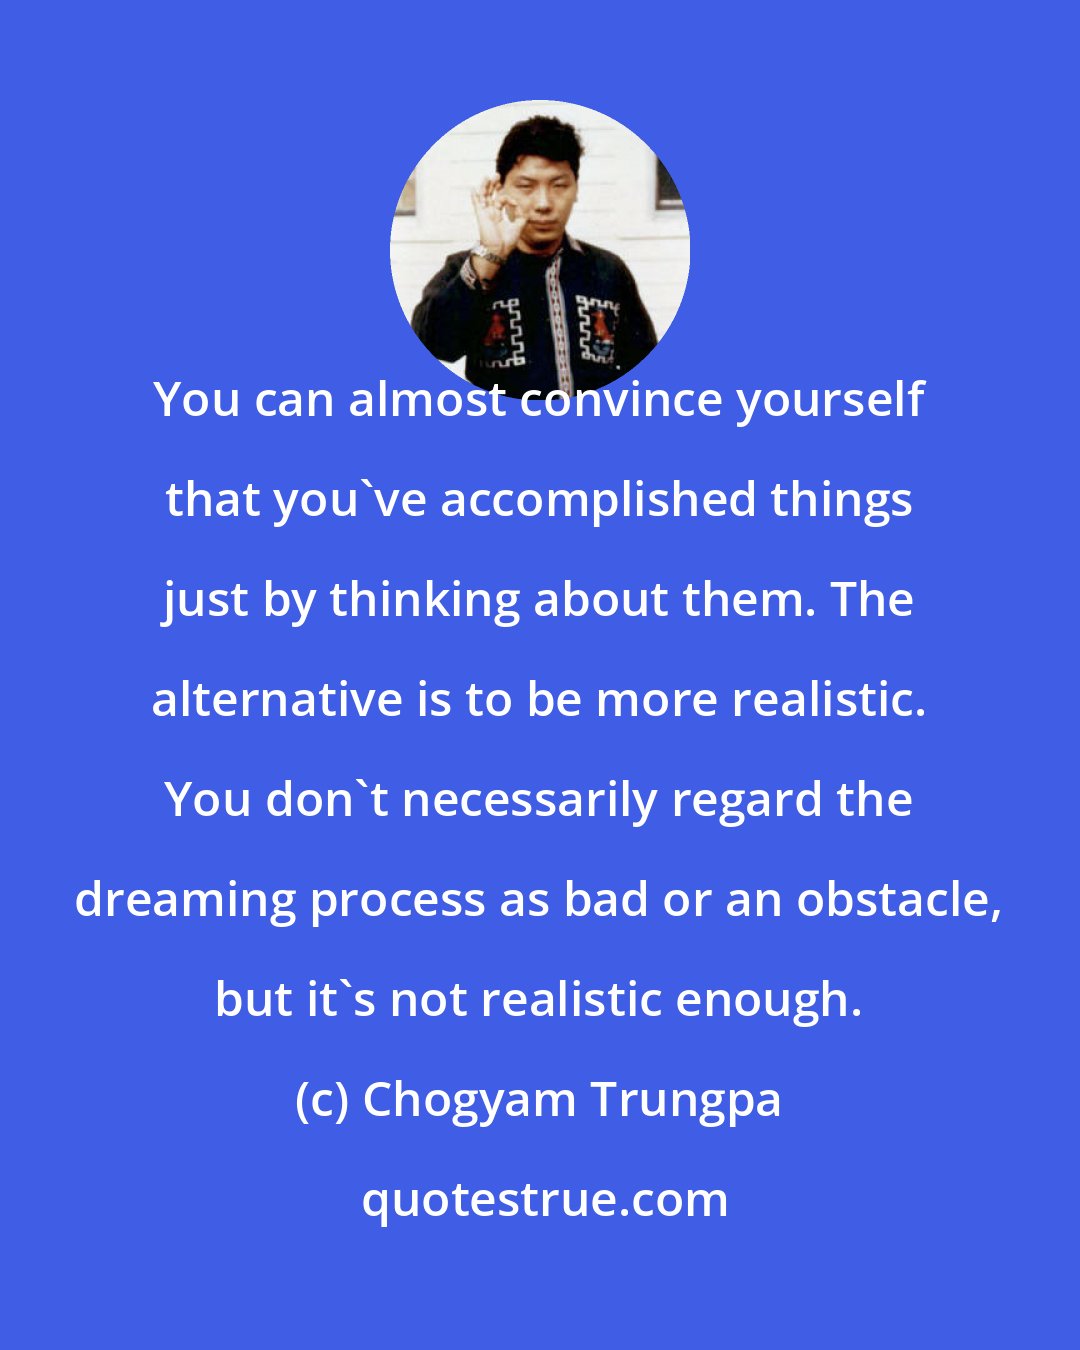 Chogyam Trungpa: You can almost convince yourself that you've accomplished things just by thinking about them. The alternative is to be more realistic. You don't necessarily regard the dreaming process as bad or an obstacle, but it's not realistic enough.